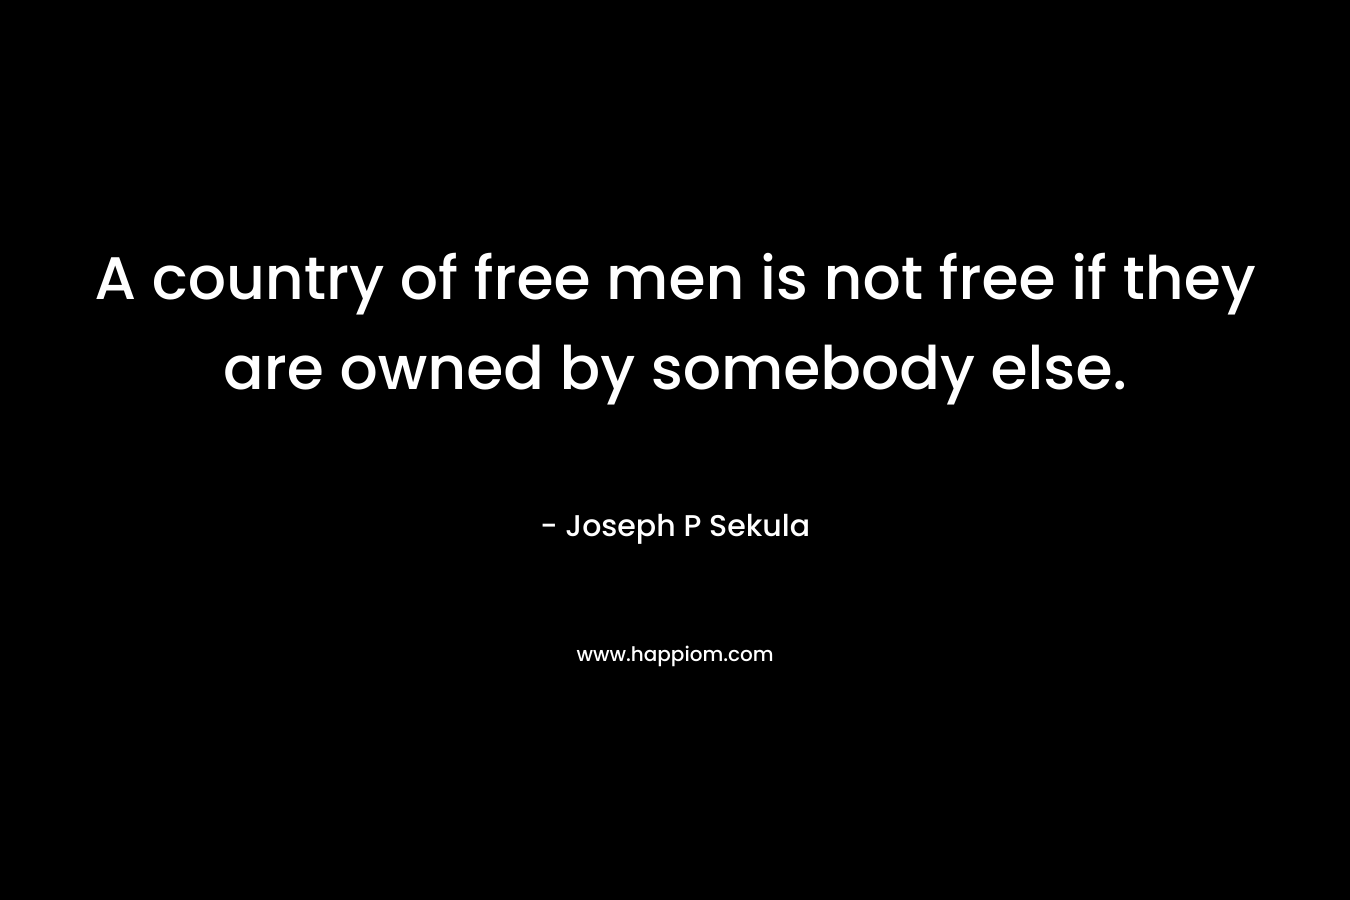 A country of free men is not free if they are owned by somebody else. – Joseph P Sekula